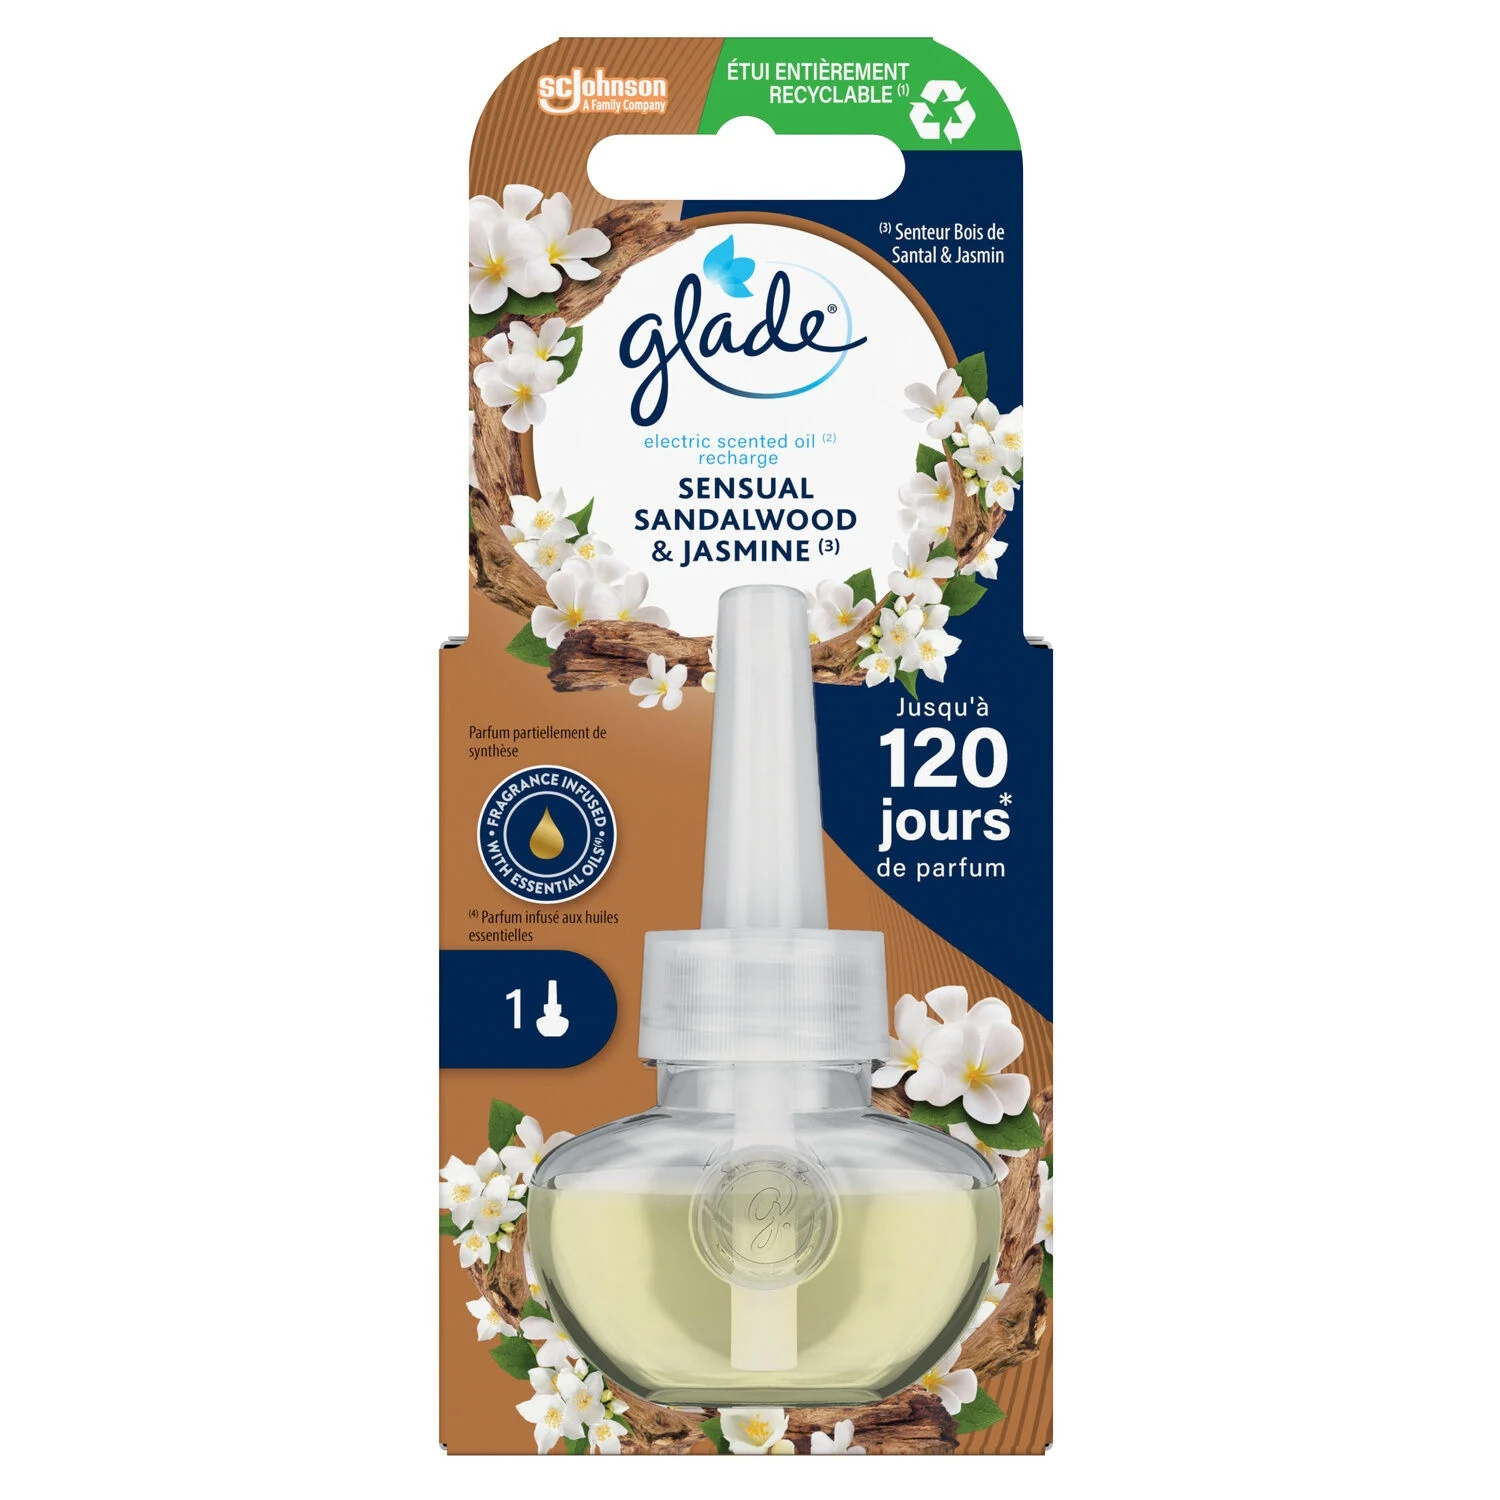 Elctrc Scented Oil Rech Glade